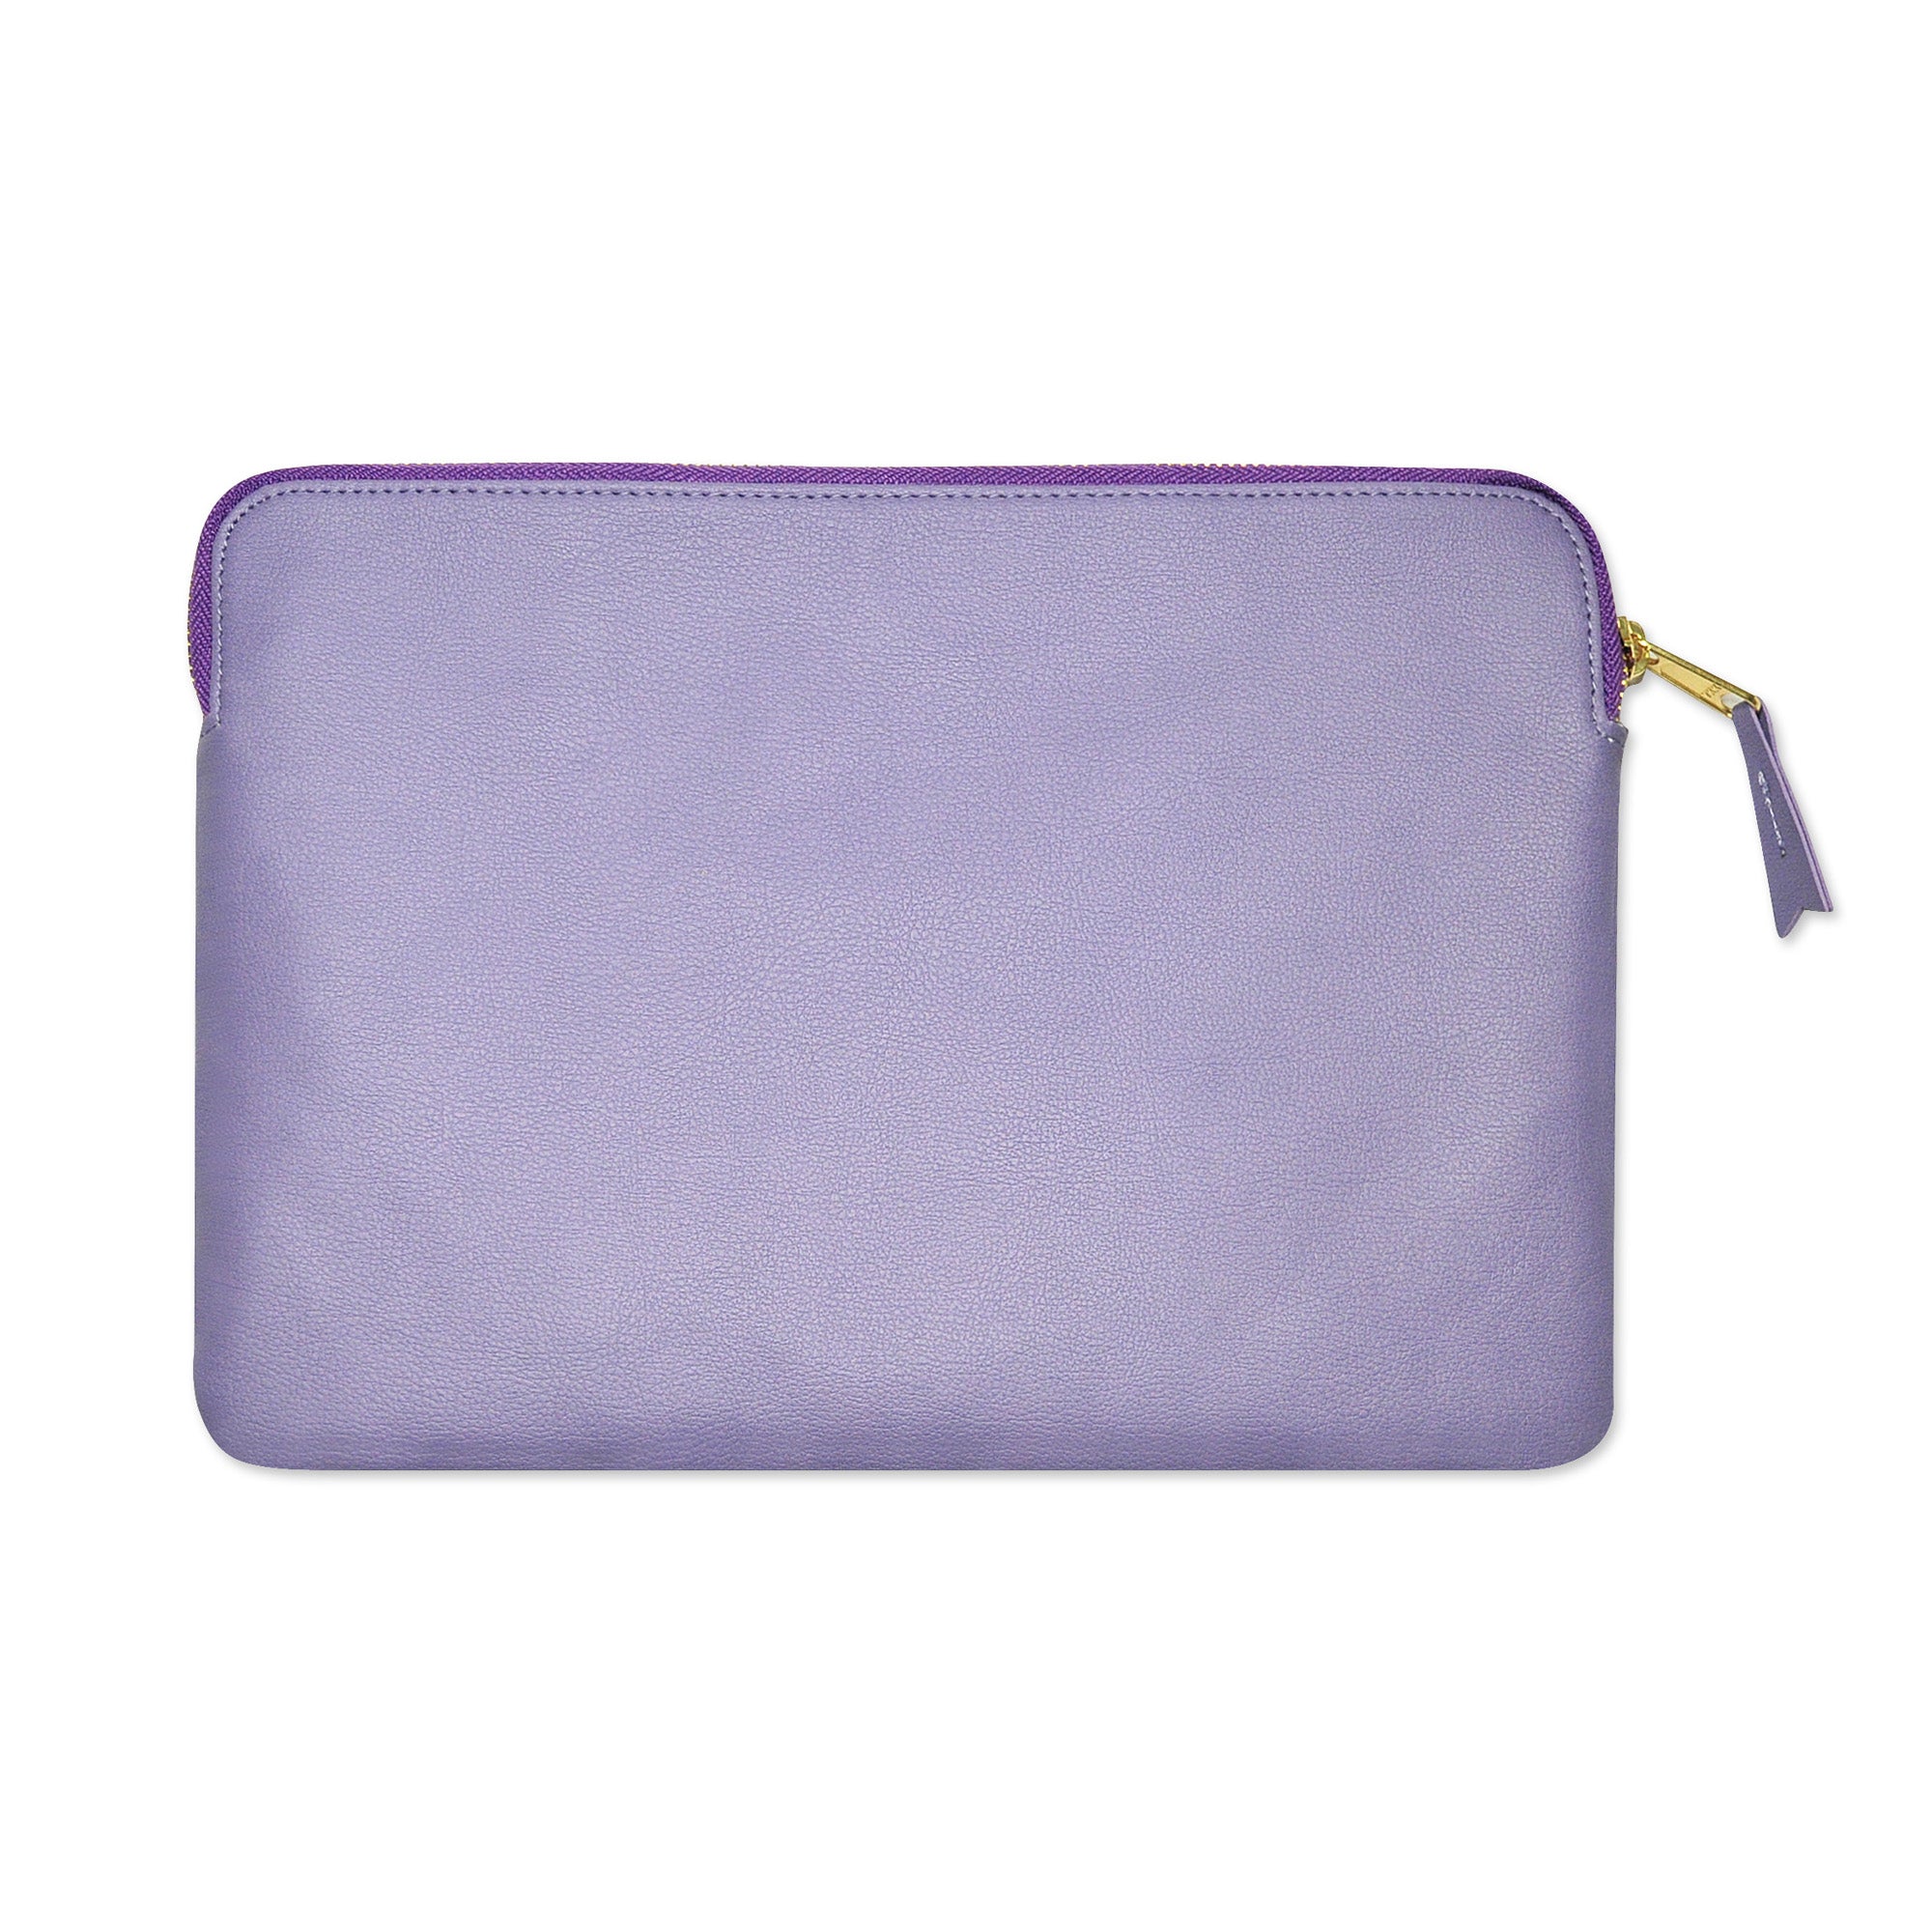 Lavender Tablet sleeve with zipper closure 